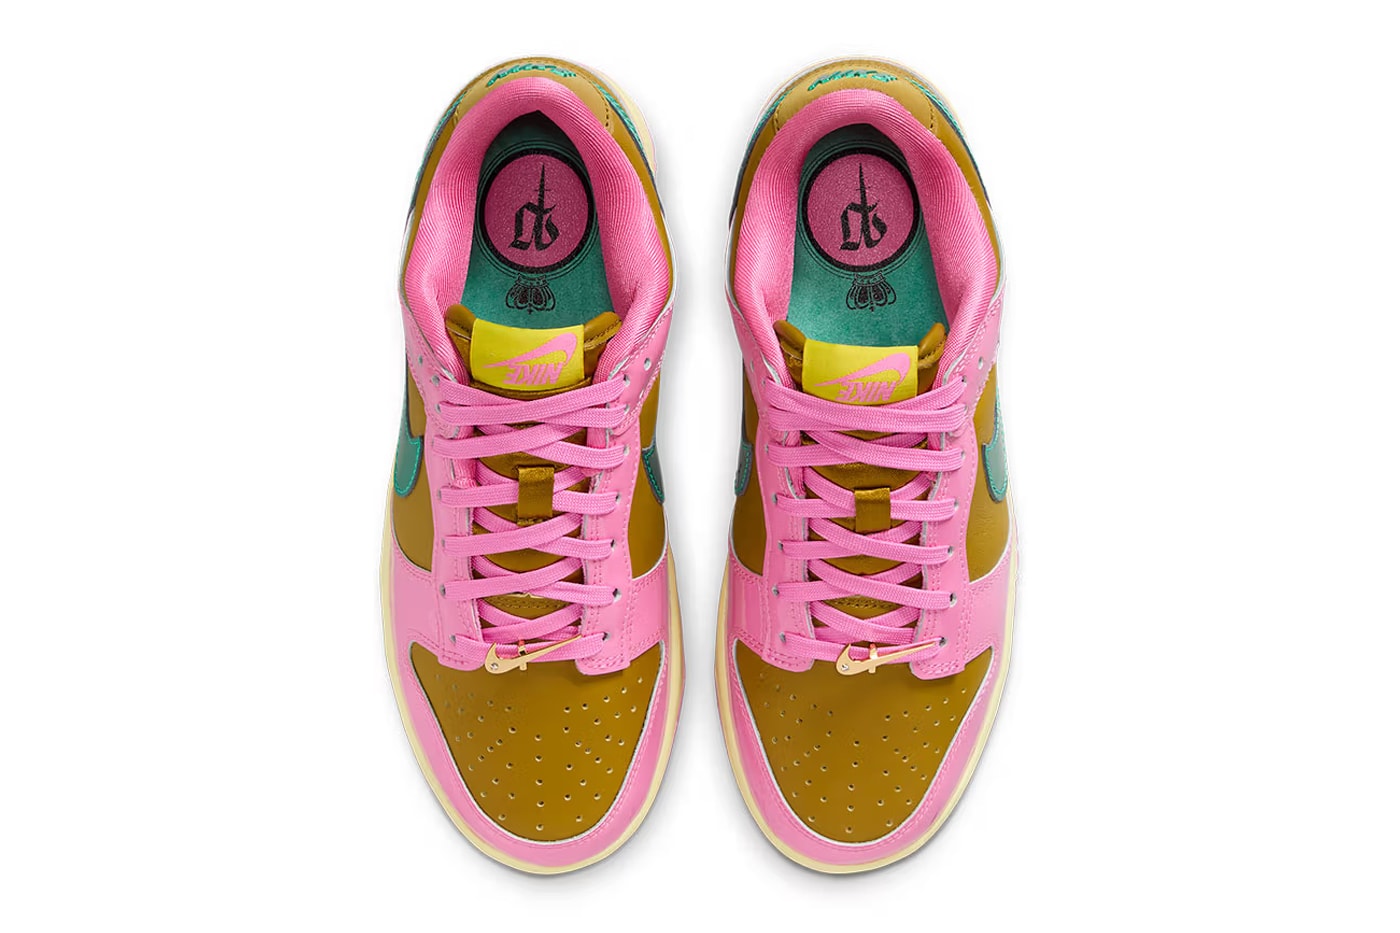 parris goebel nike dunk low FN2721 600 release date info store list buying guide photos price 